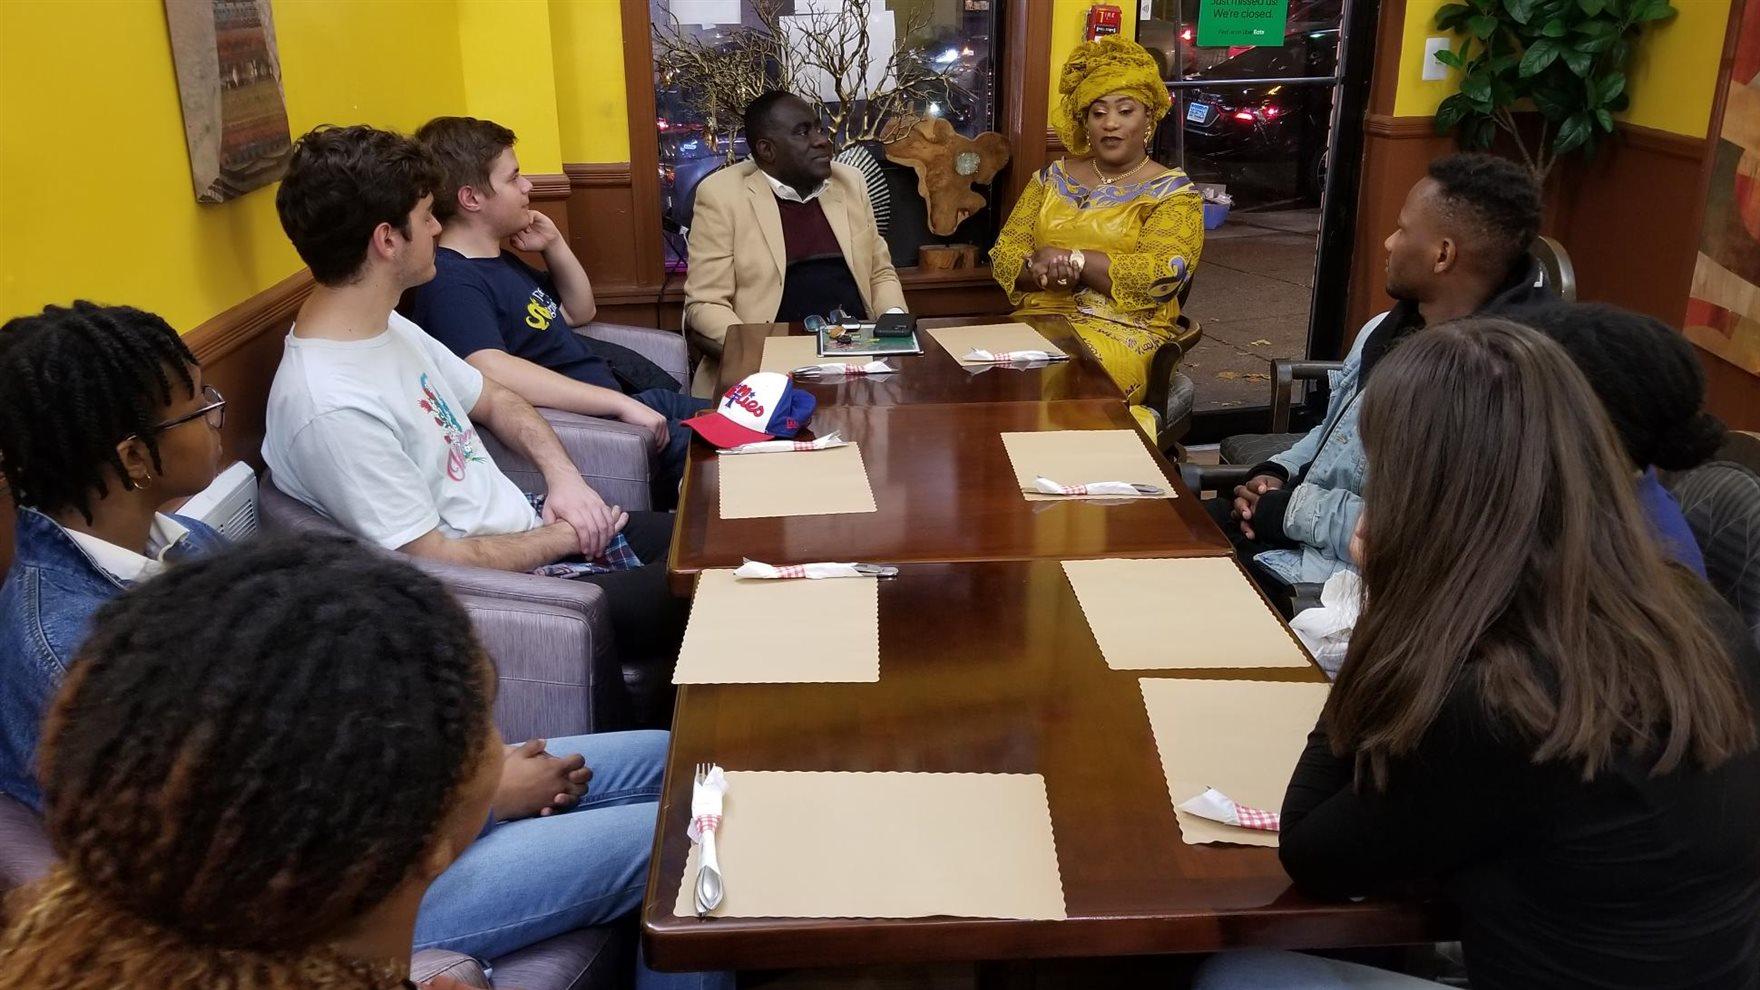 Students discussing African small businesses in West Philly